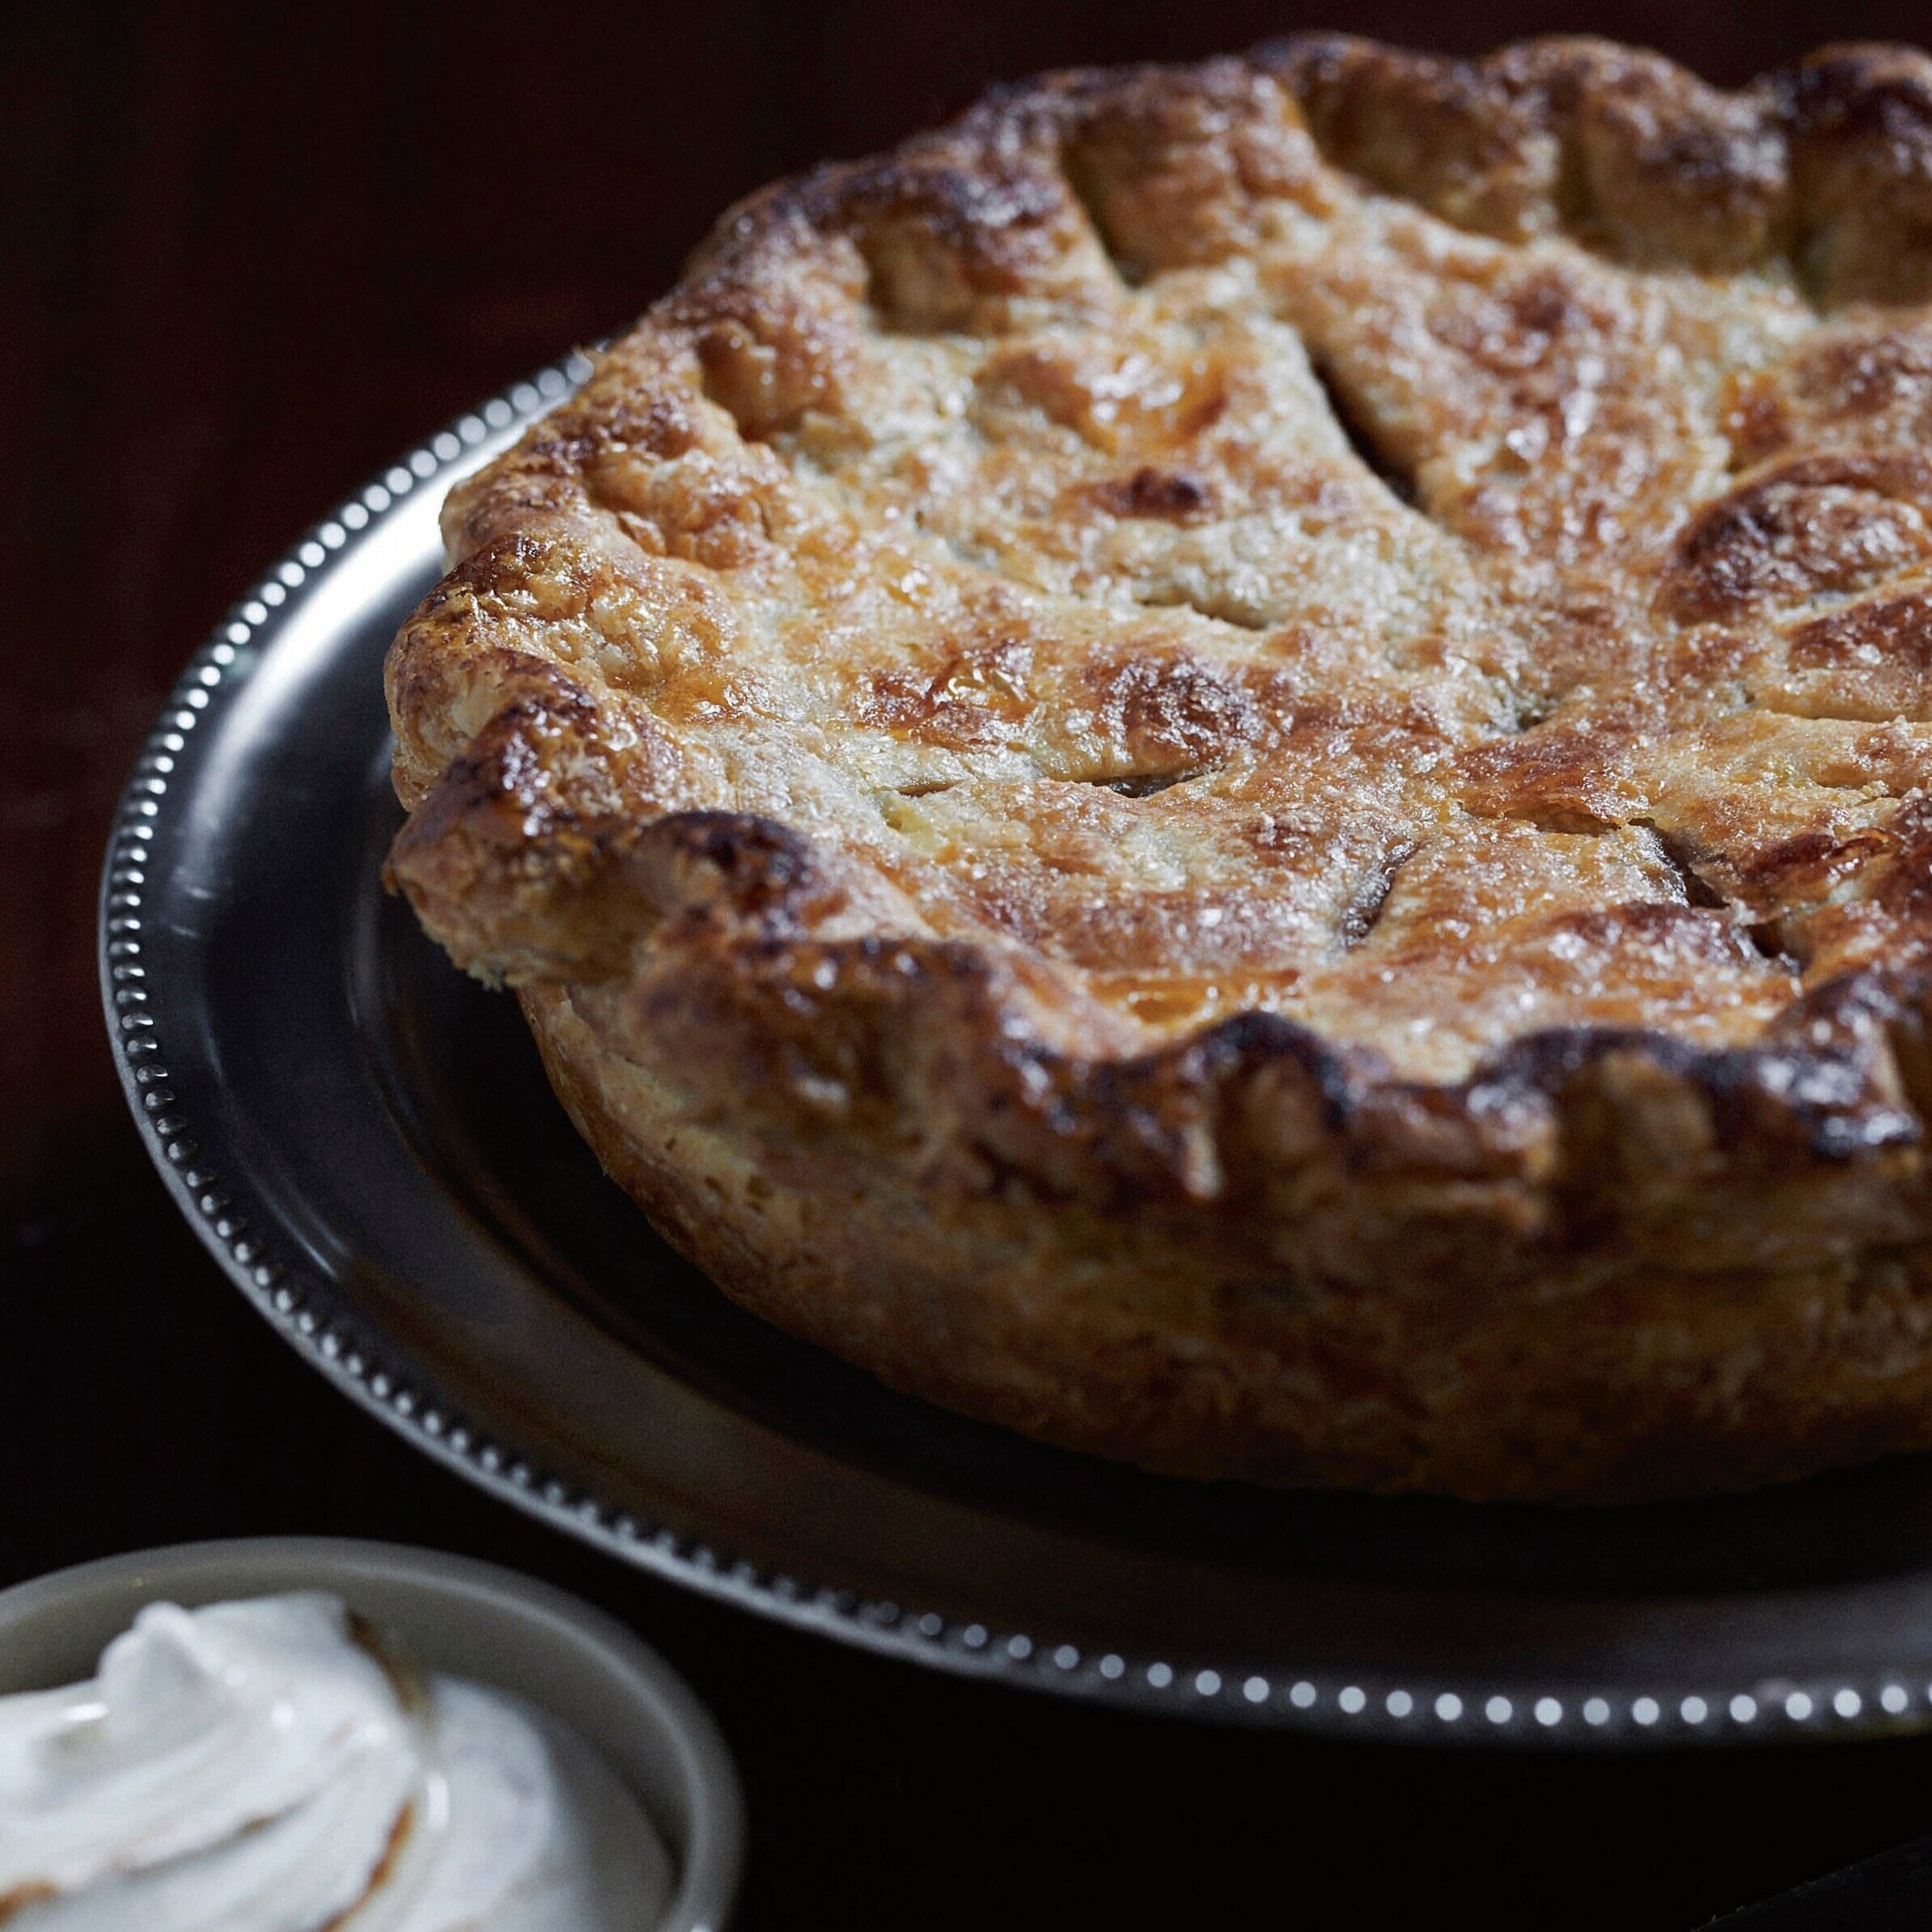 pear-and-walnut-pie-from-tyler-florence-family-meal.jpg